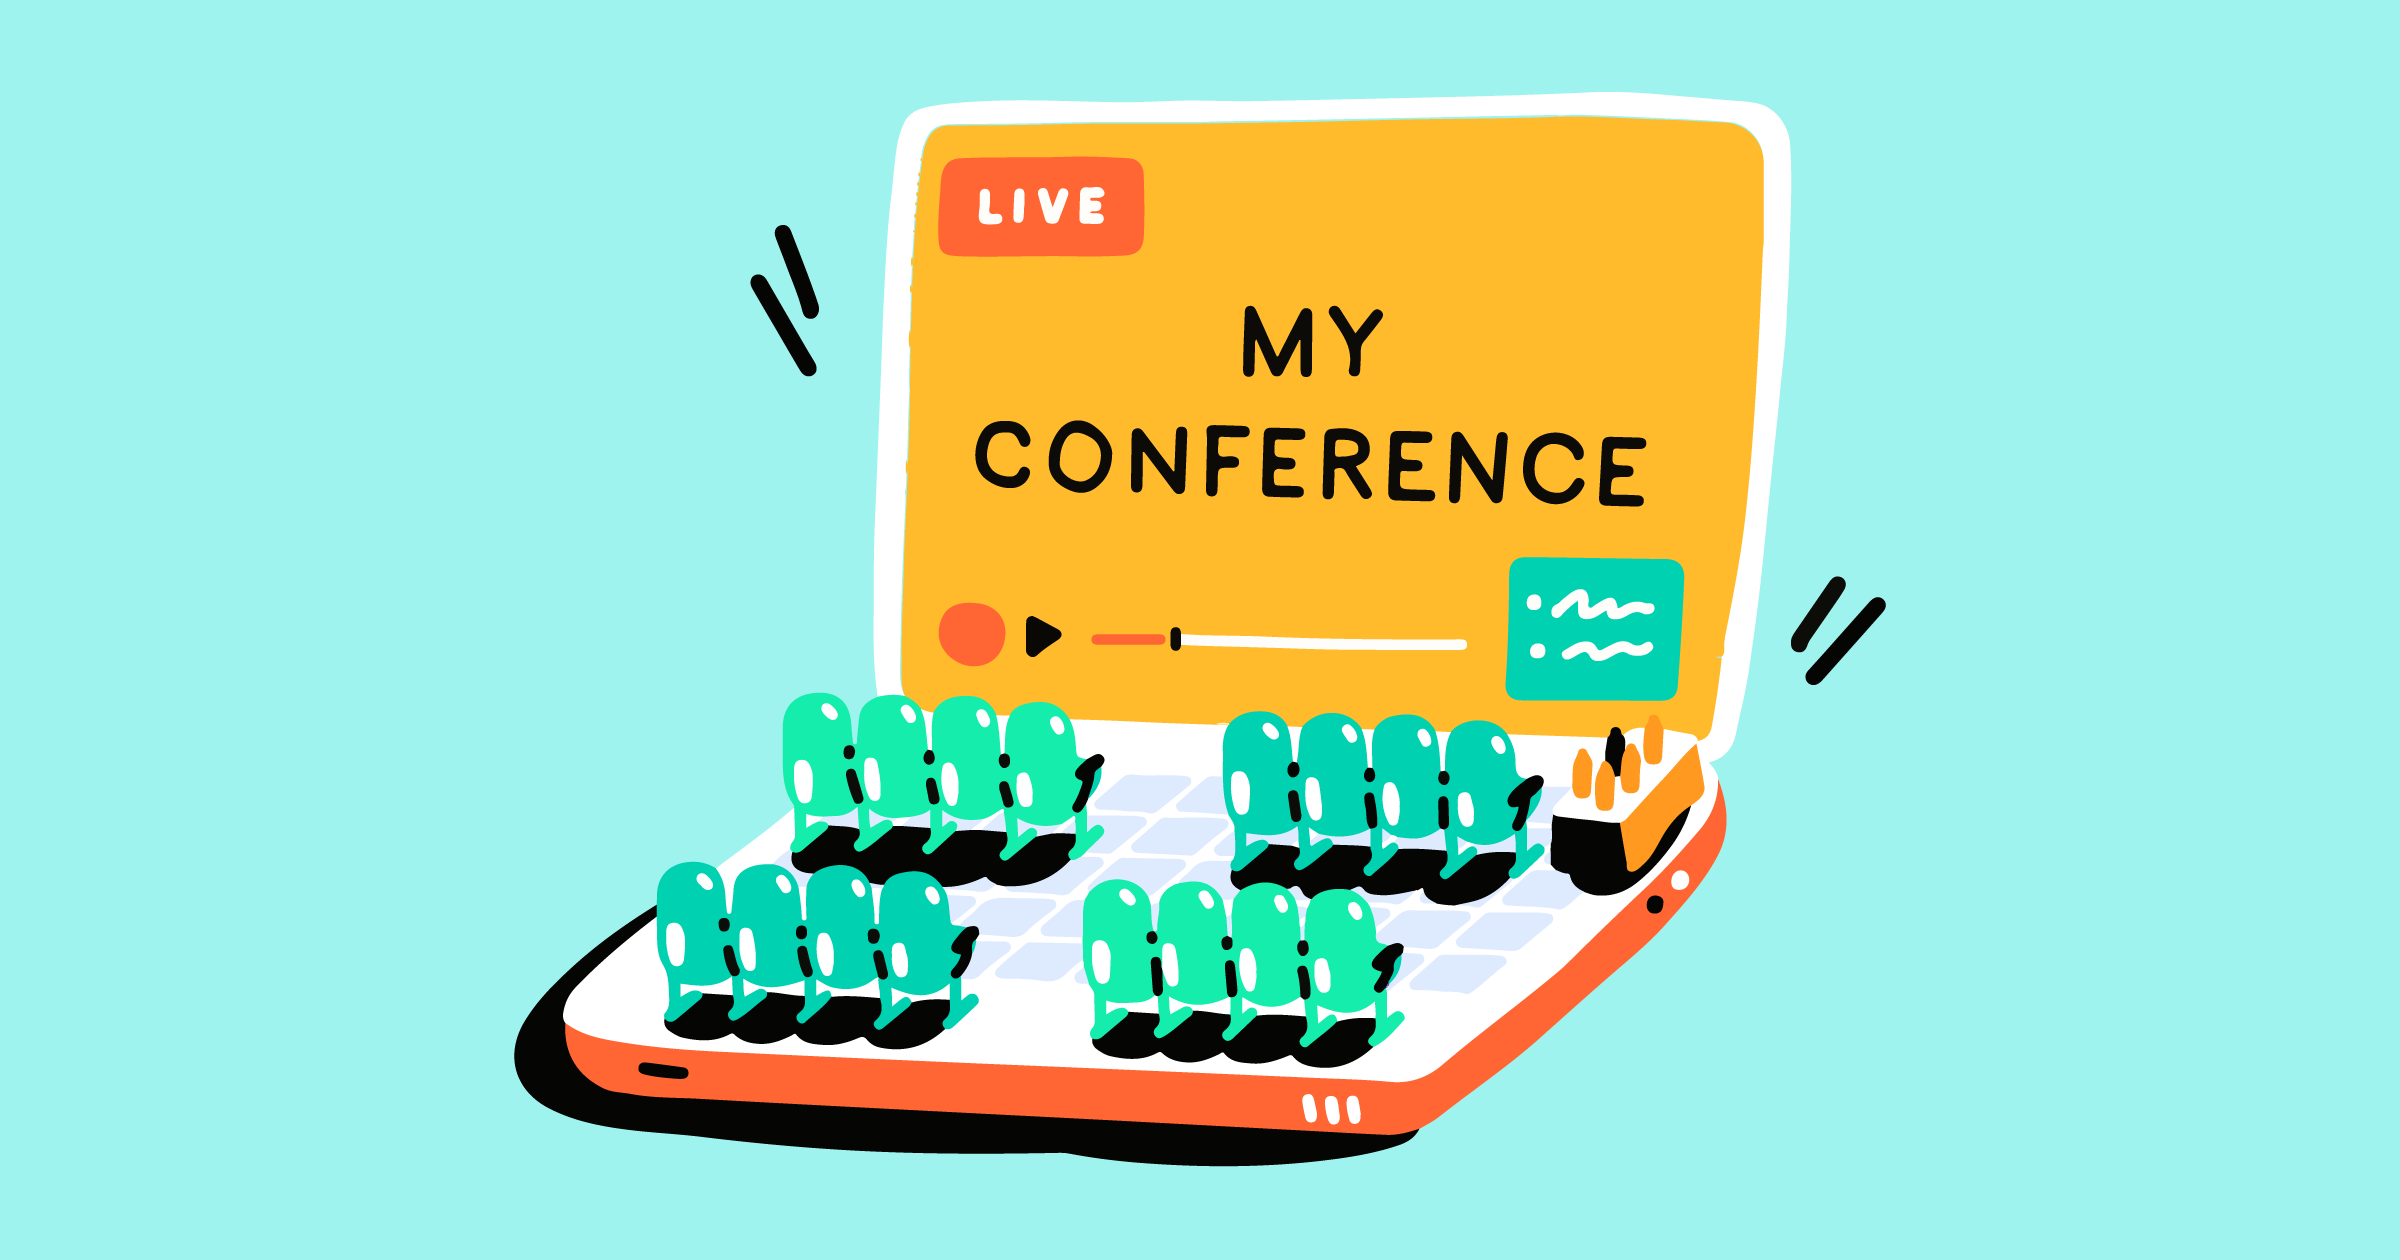 Live stream a conference